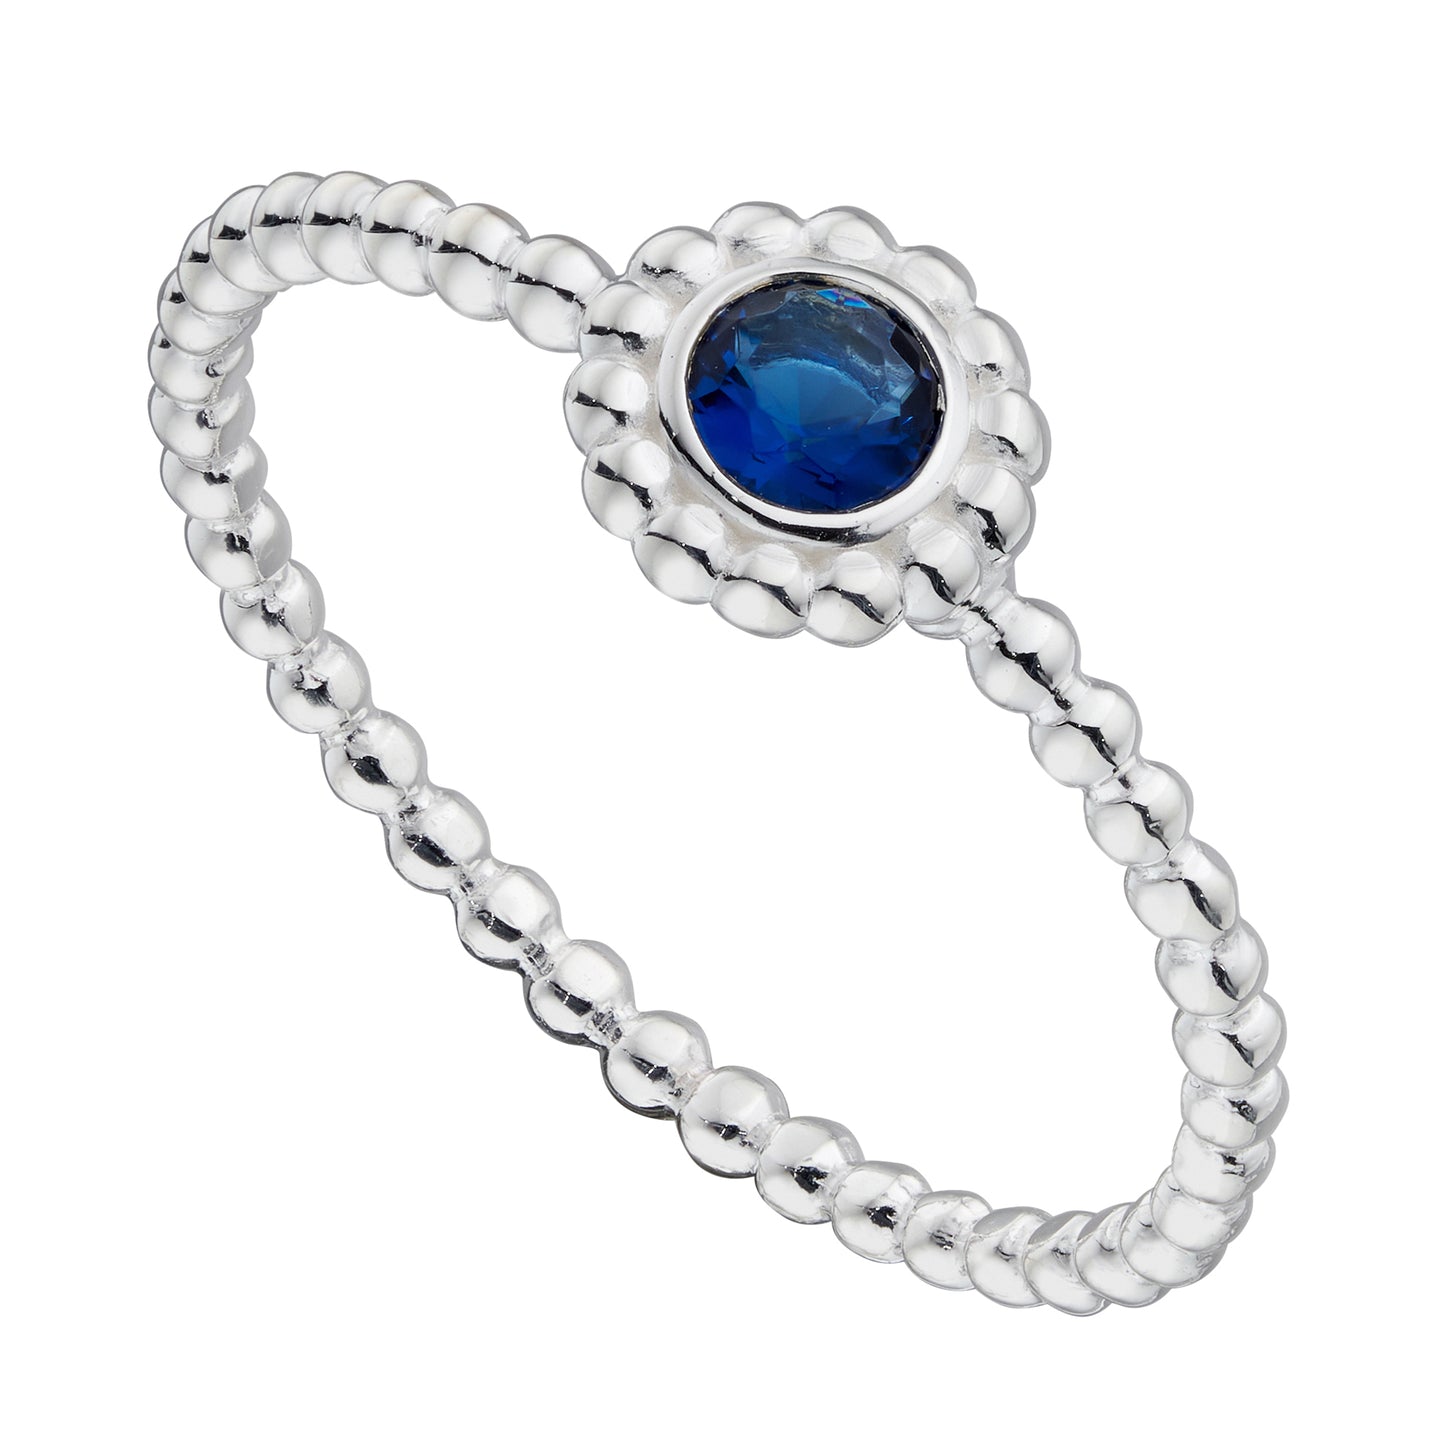 Bead Ring With Sapphire Blue Crystal